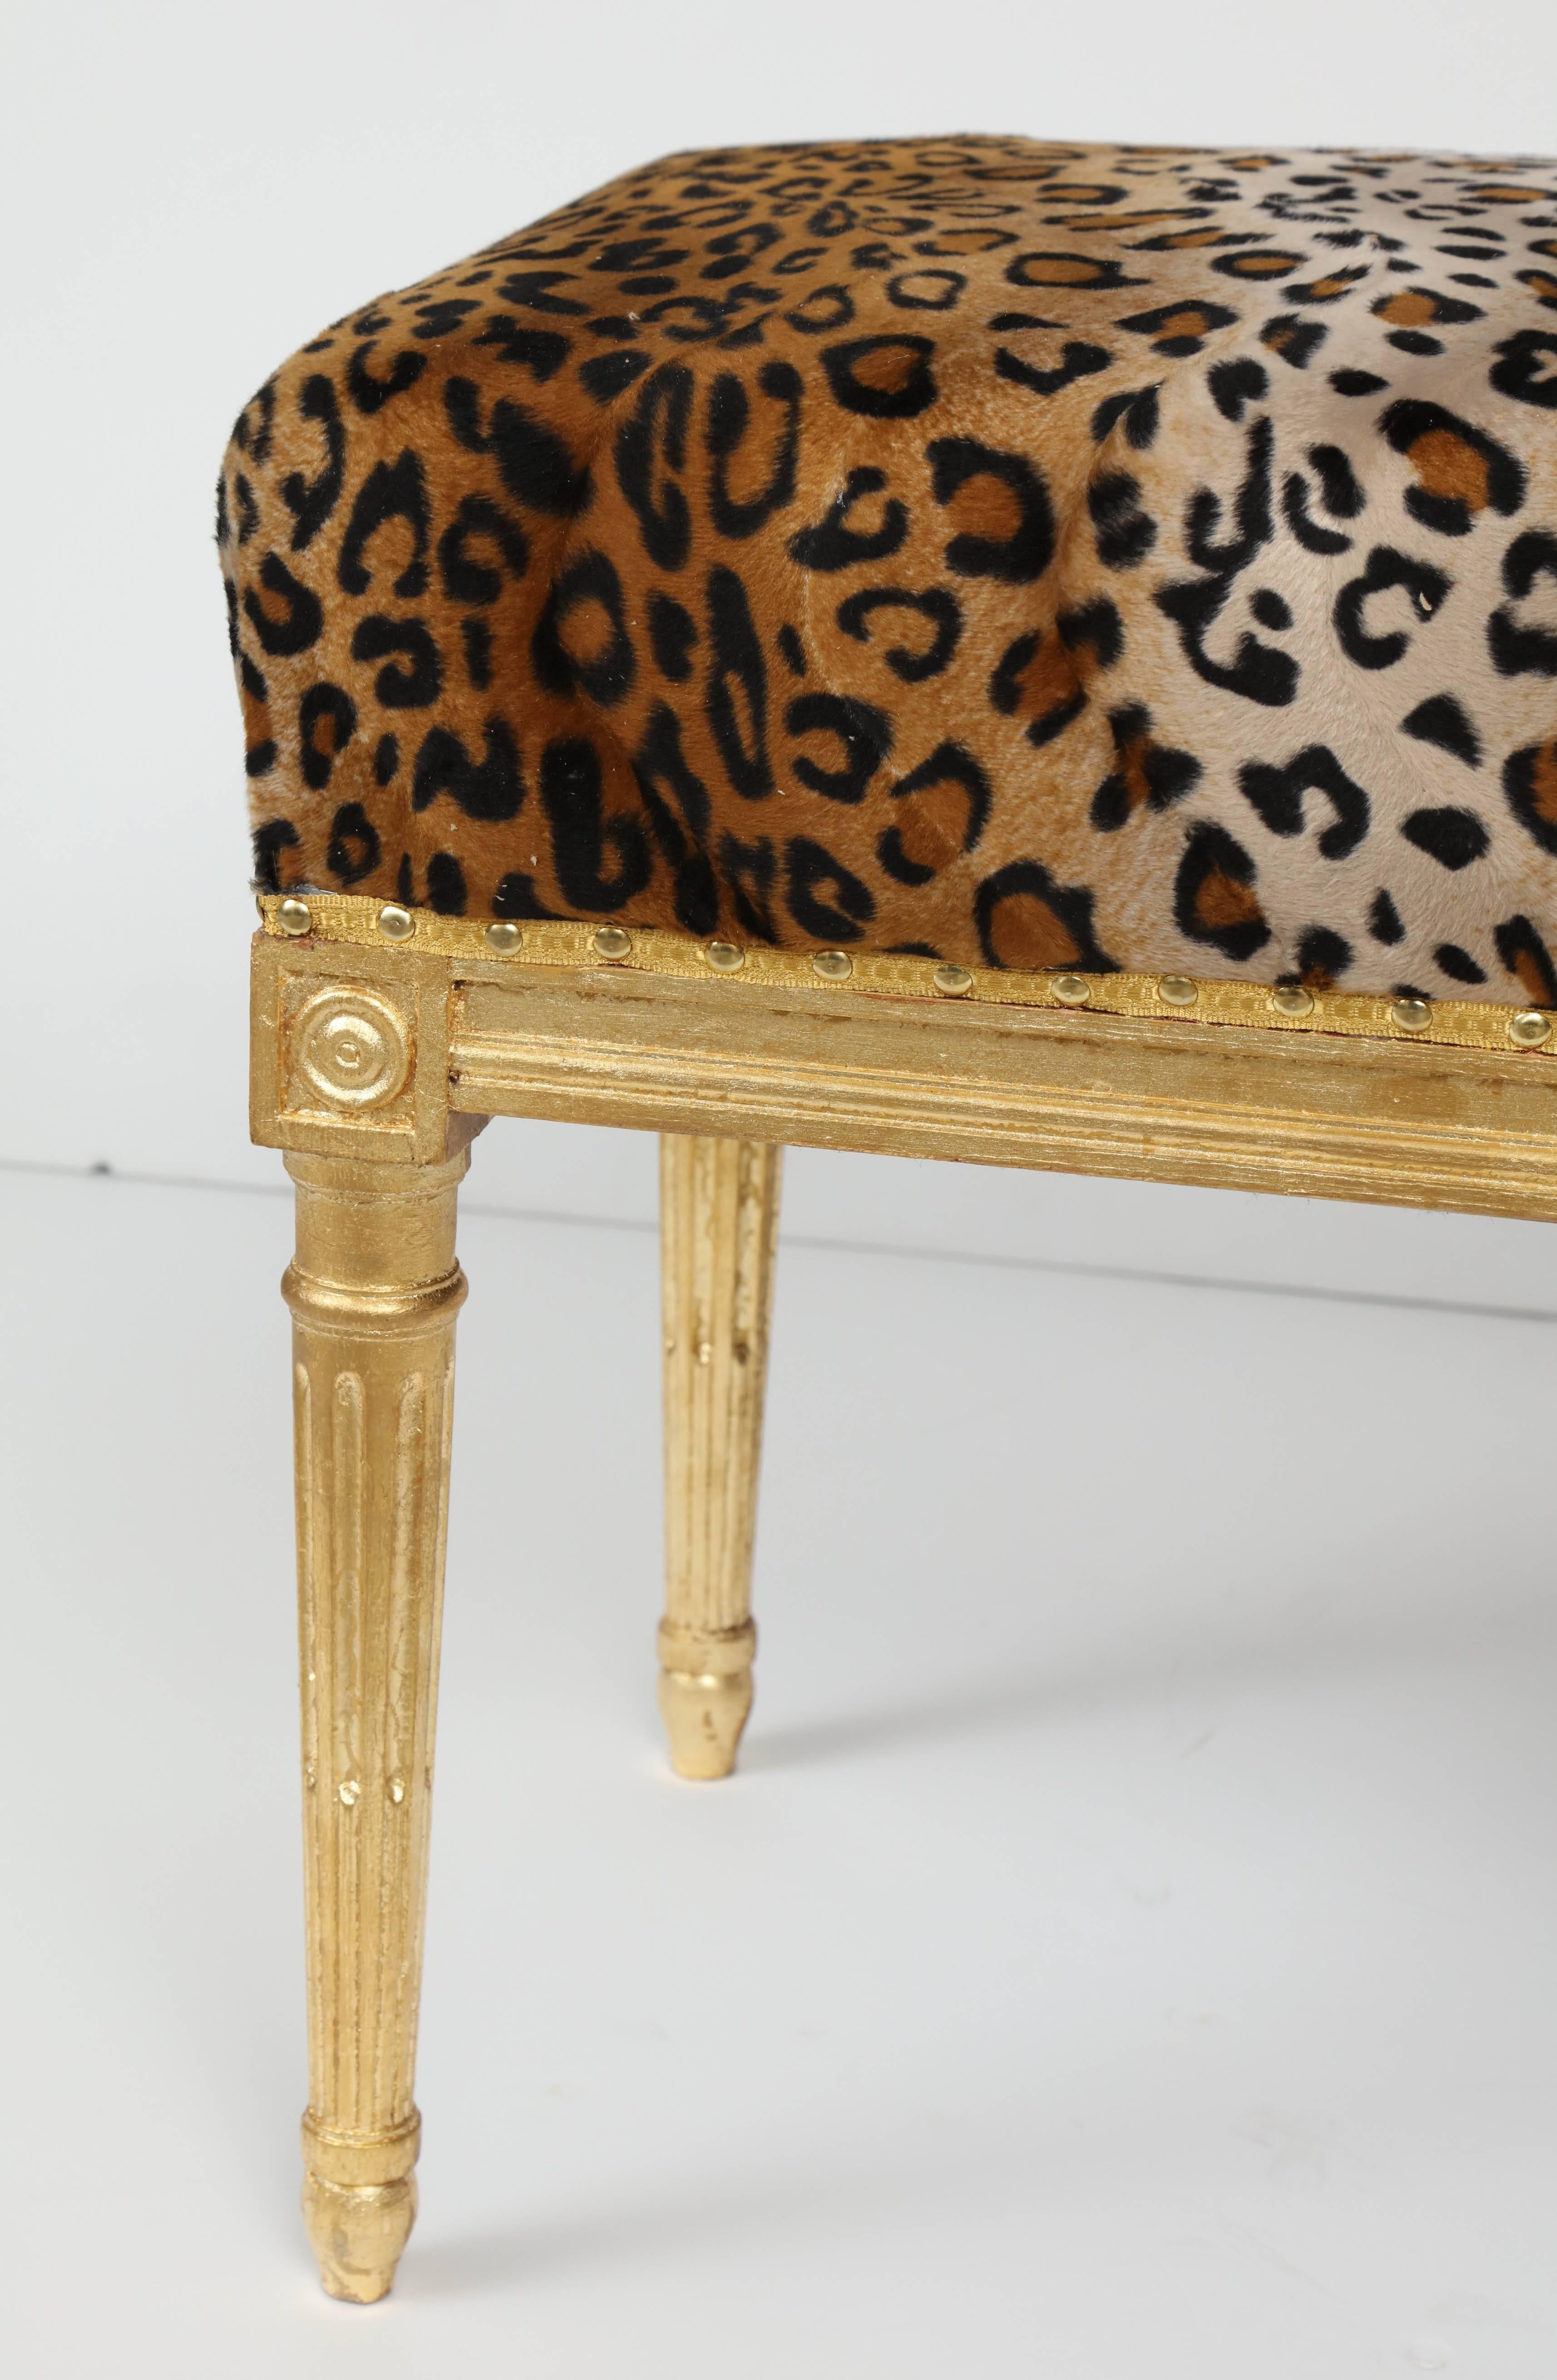 Everyone needs a little animal skin print somewhere! We think the perfect place for a leopard print is on this chick Louis XVI style bench. The base has fluted, tapered legs characteristic of the Louis XVI style and the leopard print is finished